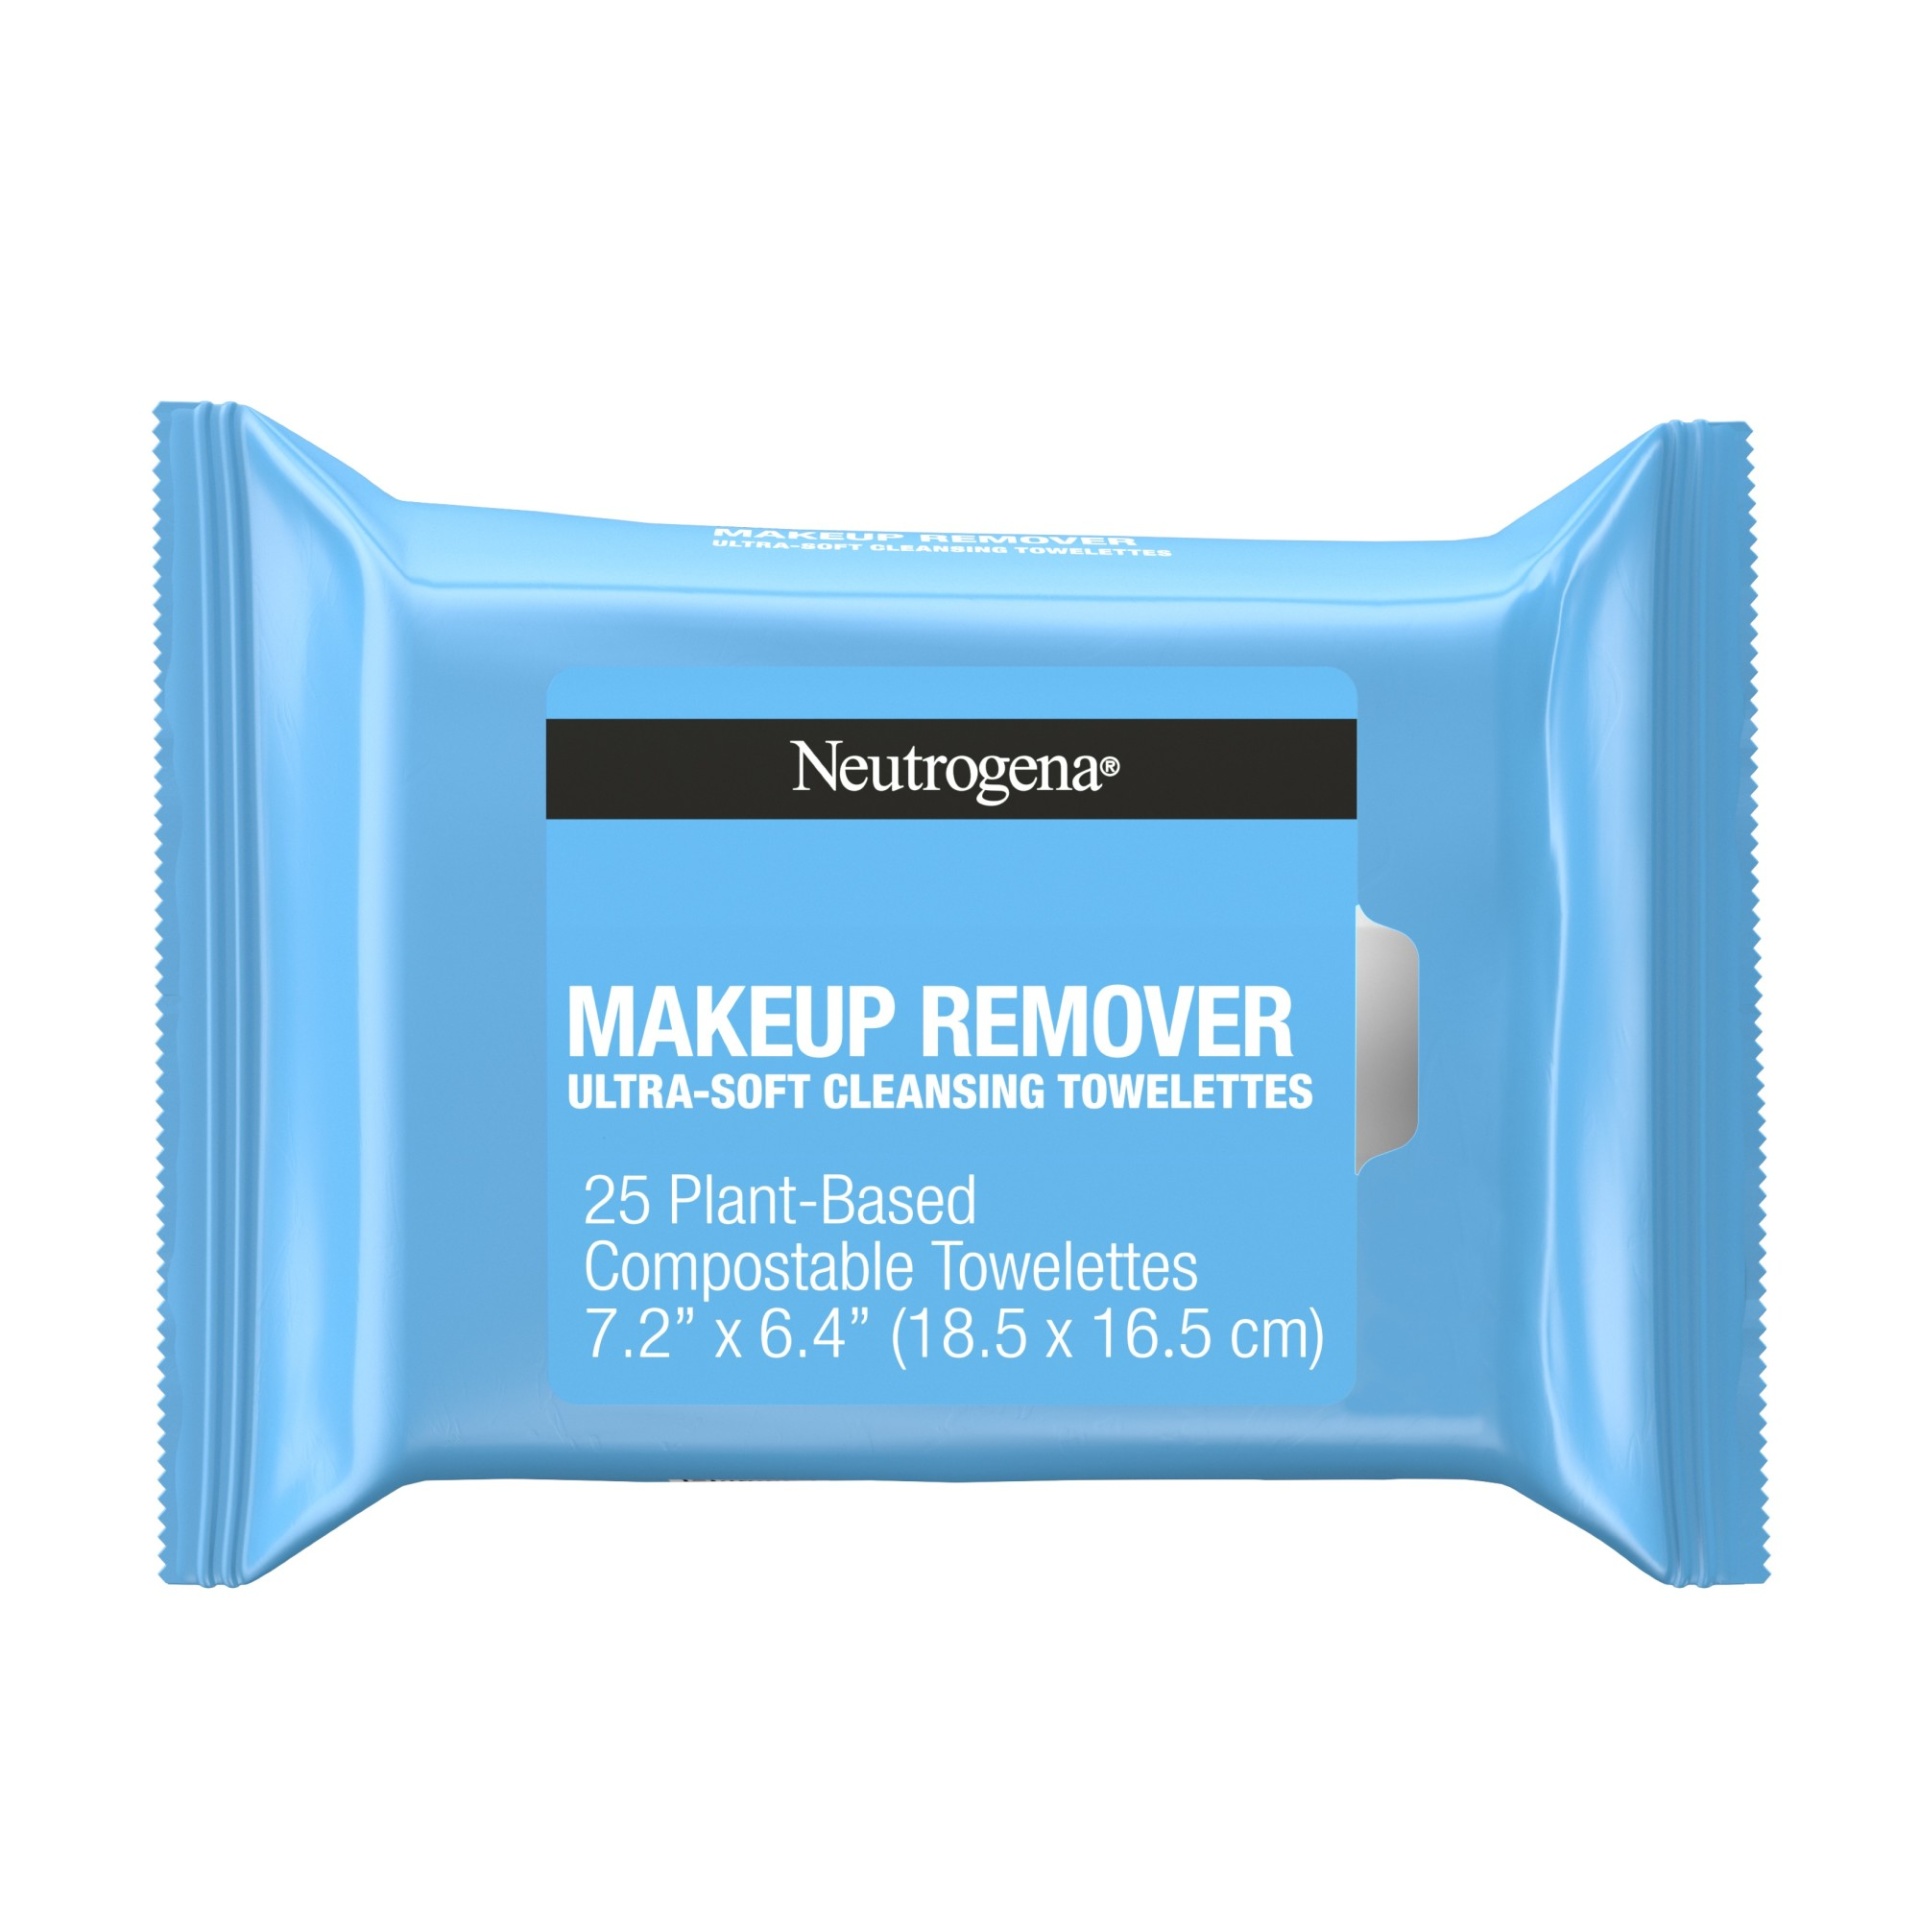 slide 1 of 7, Neutrogena Makeup Remover Facial Cleansing Towelettes, Daily Face Wipes Remove Dirt, Oil, Sweat, Makeup & Waterproof Mascara, Gentle, Soap- & Alcohol-Free, 100% Plant-Based Fibers, 25 ct